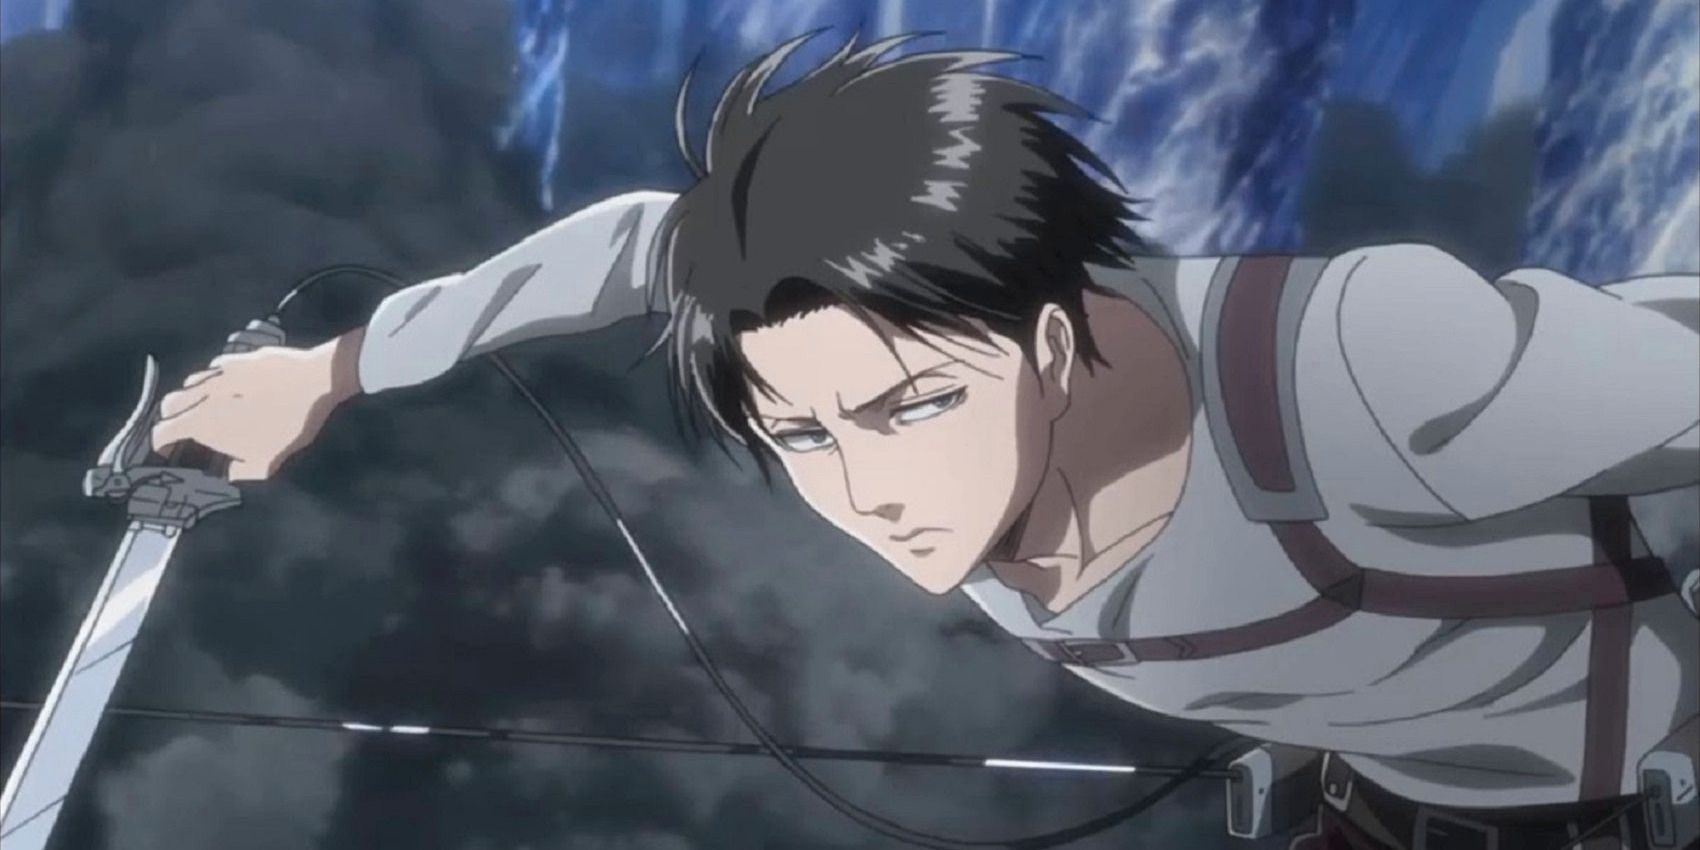 Levi from Attack On Titan.